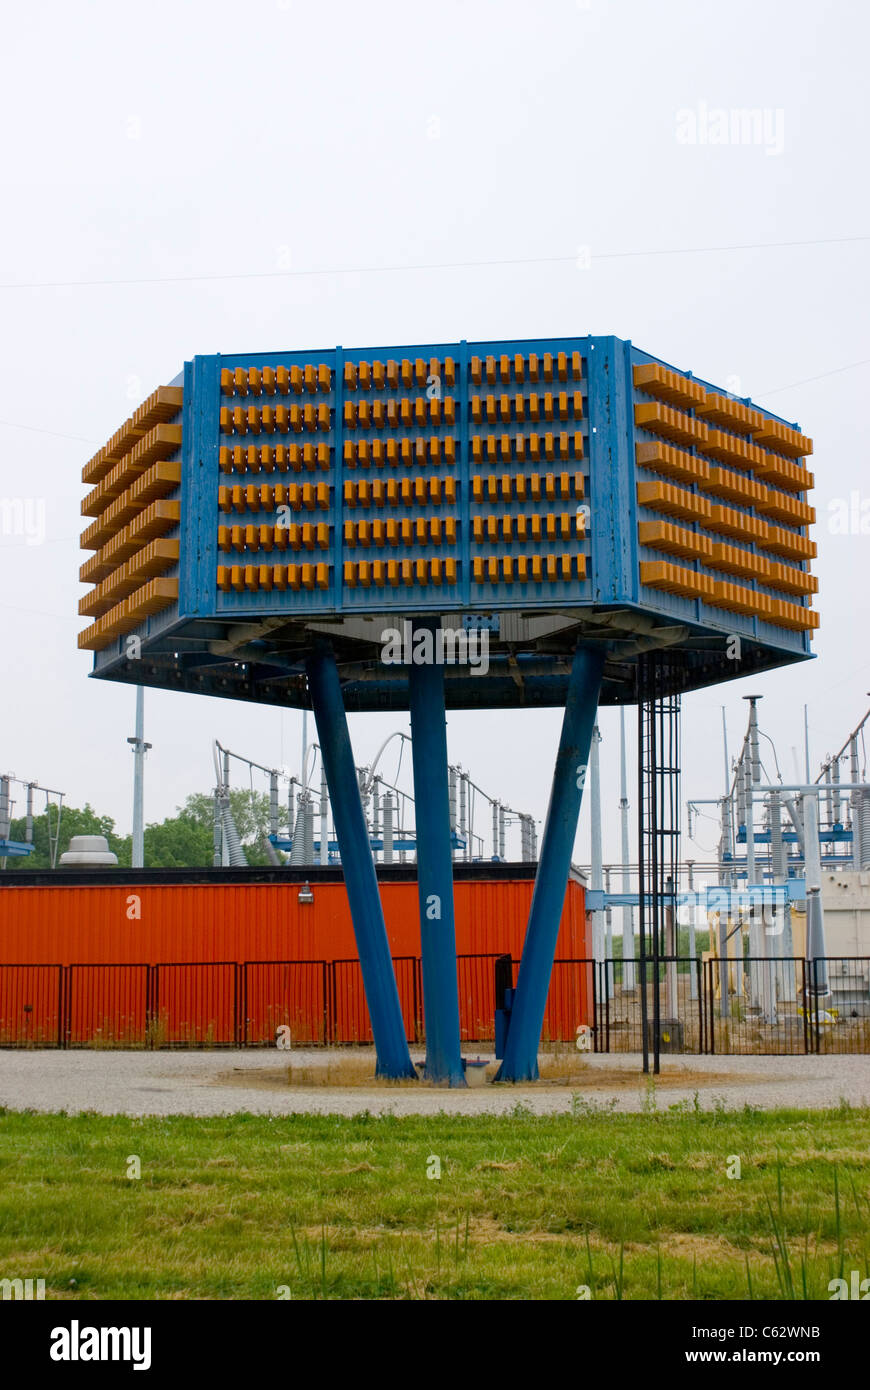 Electricity substation with capacitor tower at Fermilab high energy physics laboratory near Chicago, Illinois, USA Stock Photo